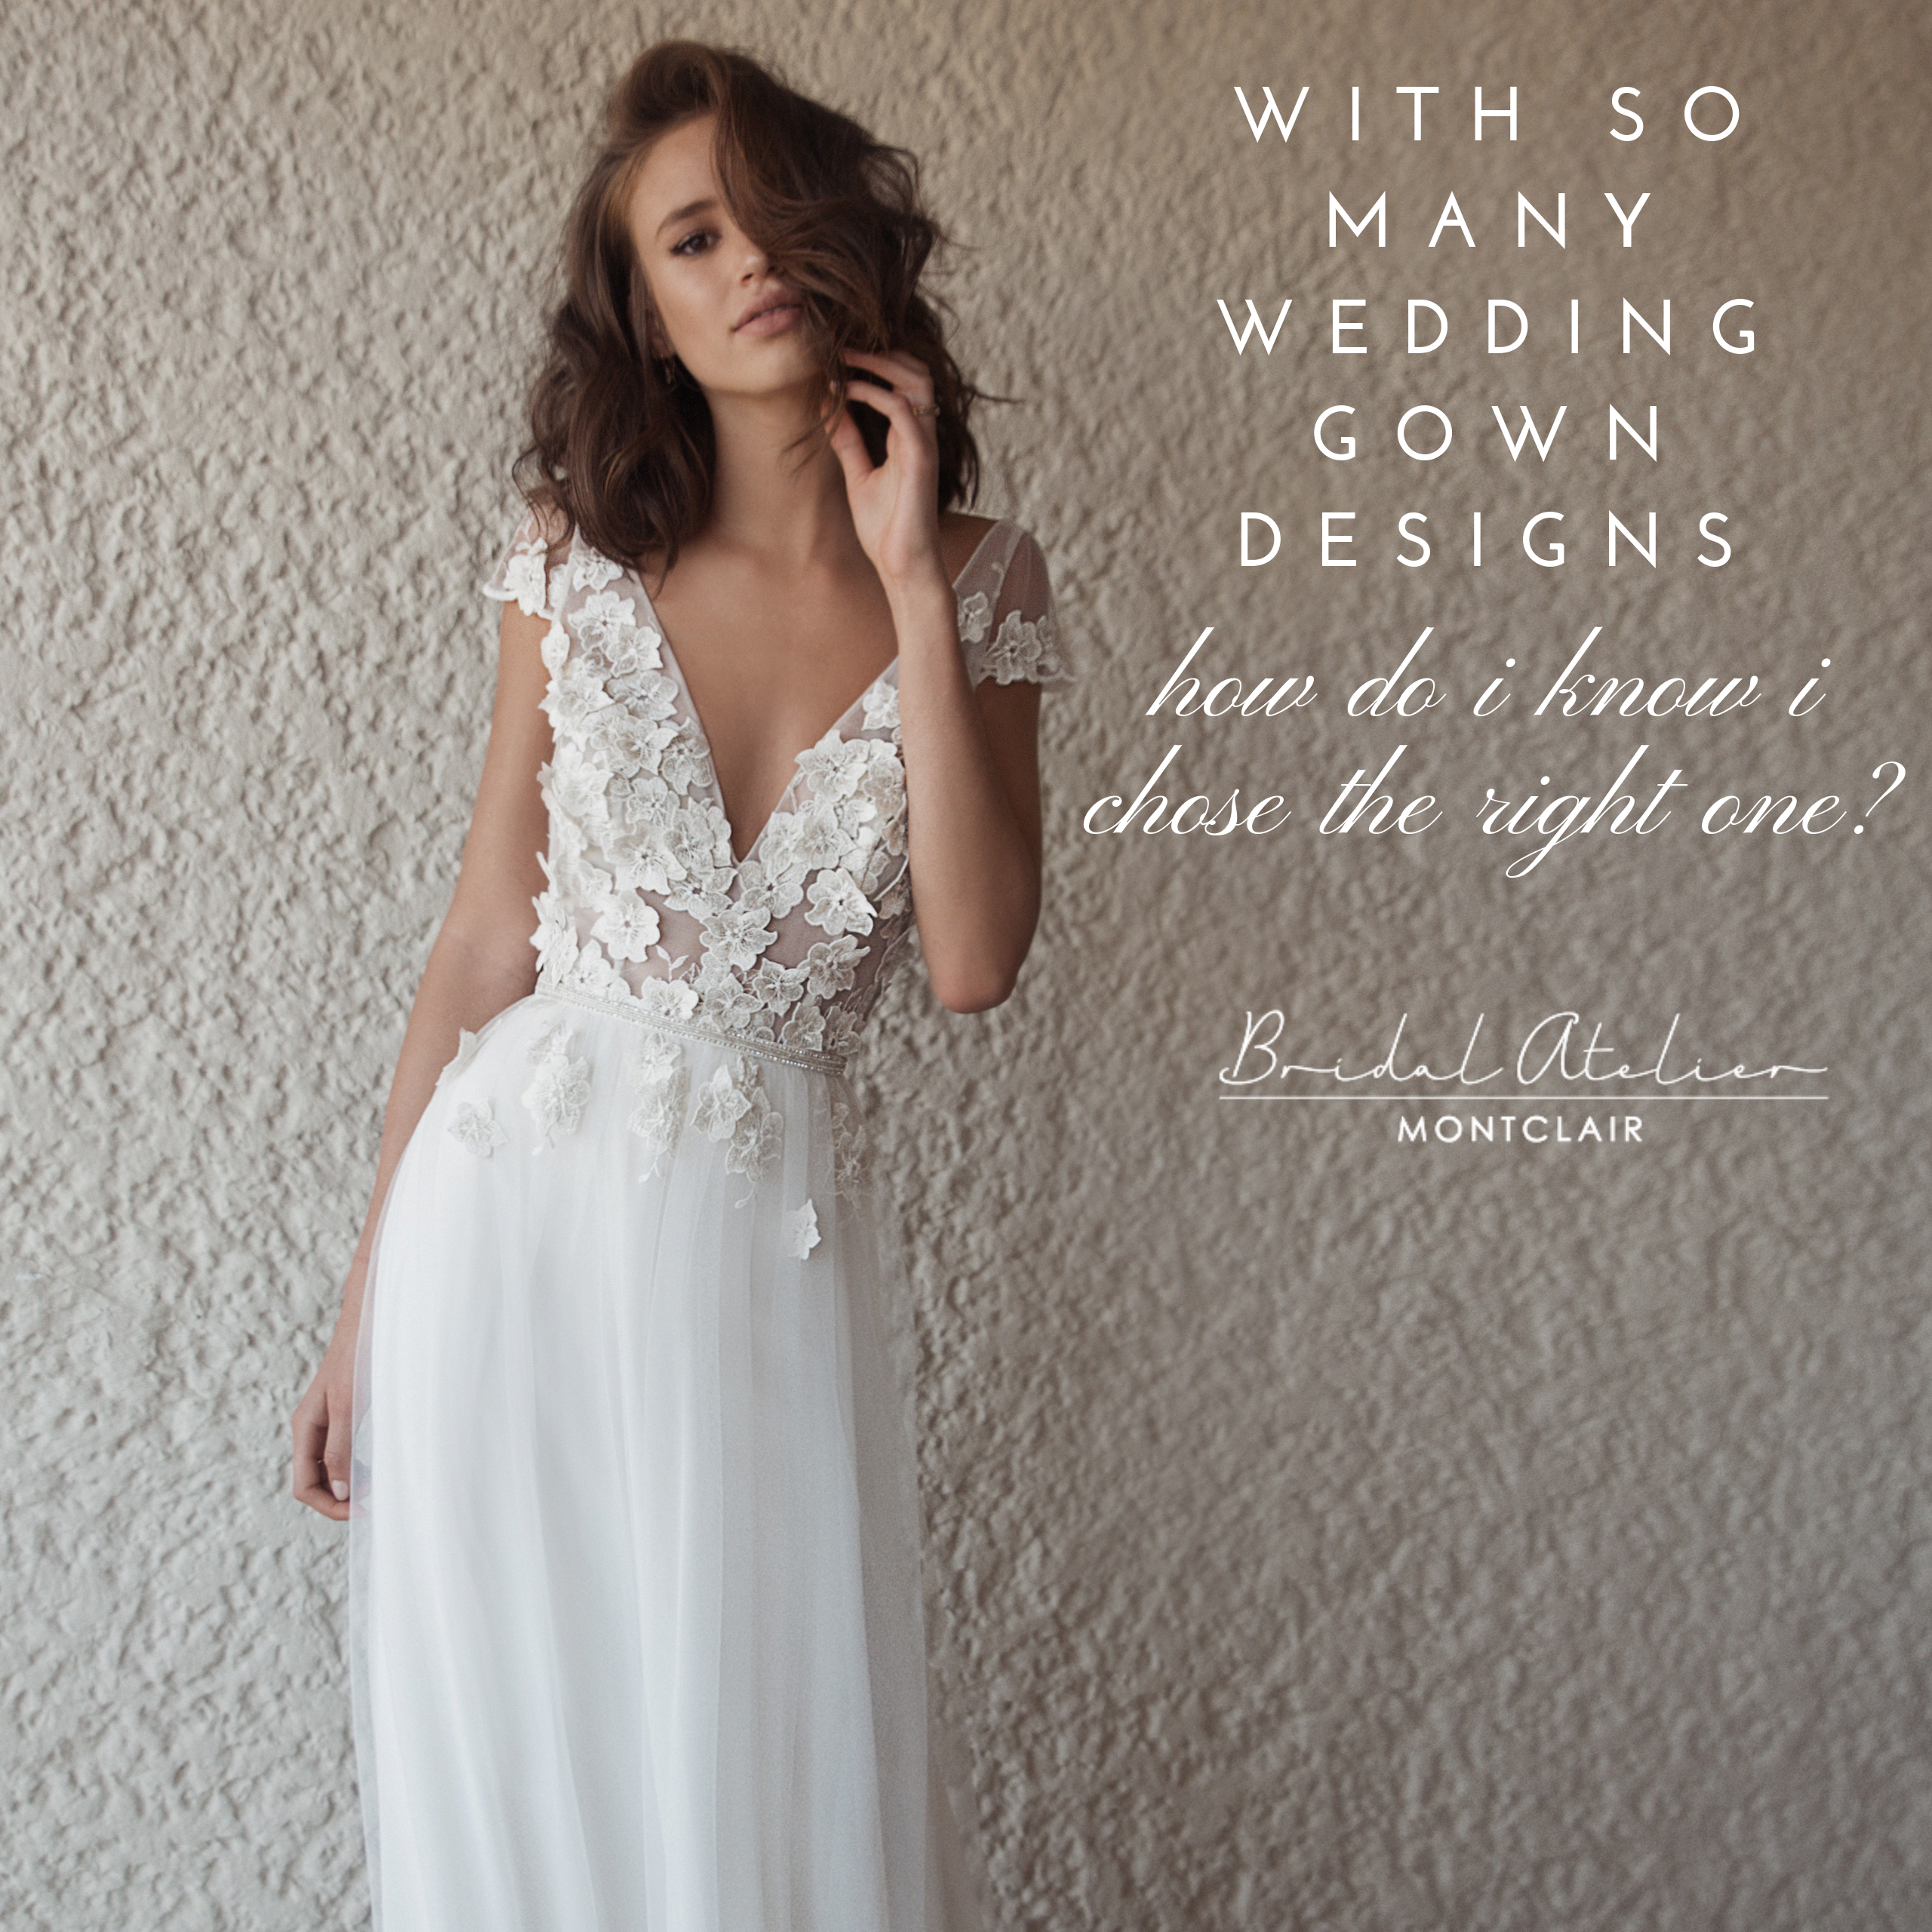 With So Many Wedding Gown Designs How Do I Know I Chose the Right One? Image